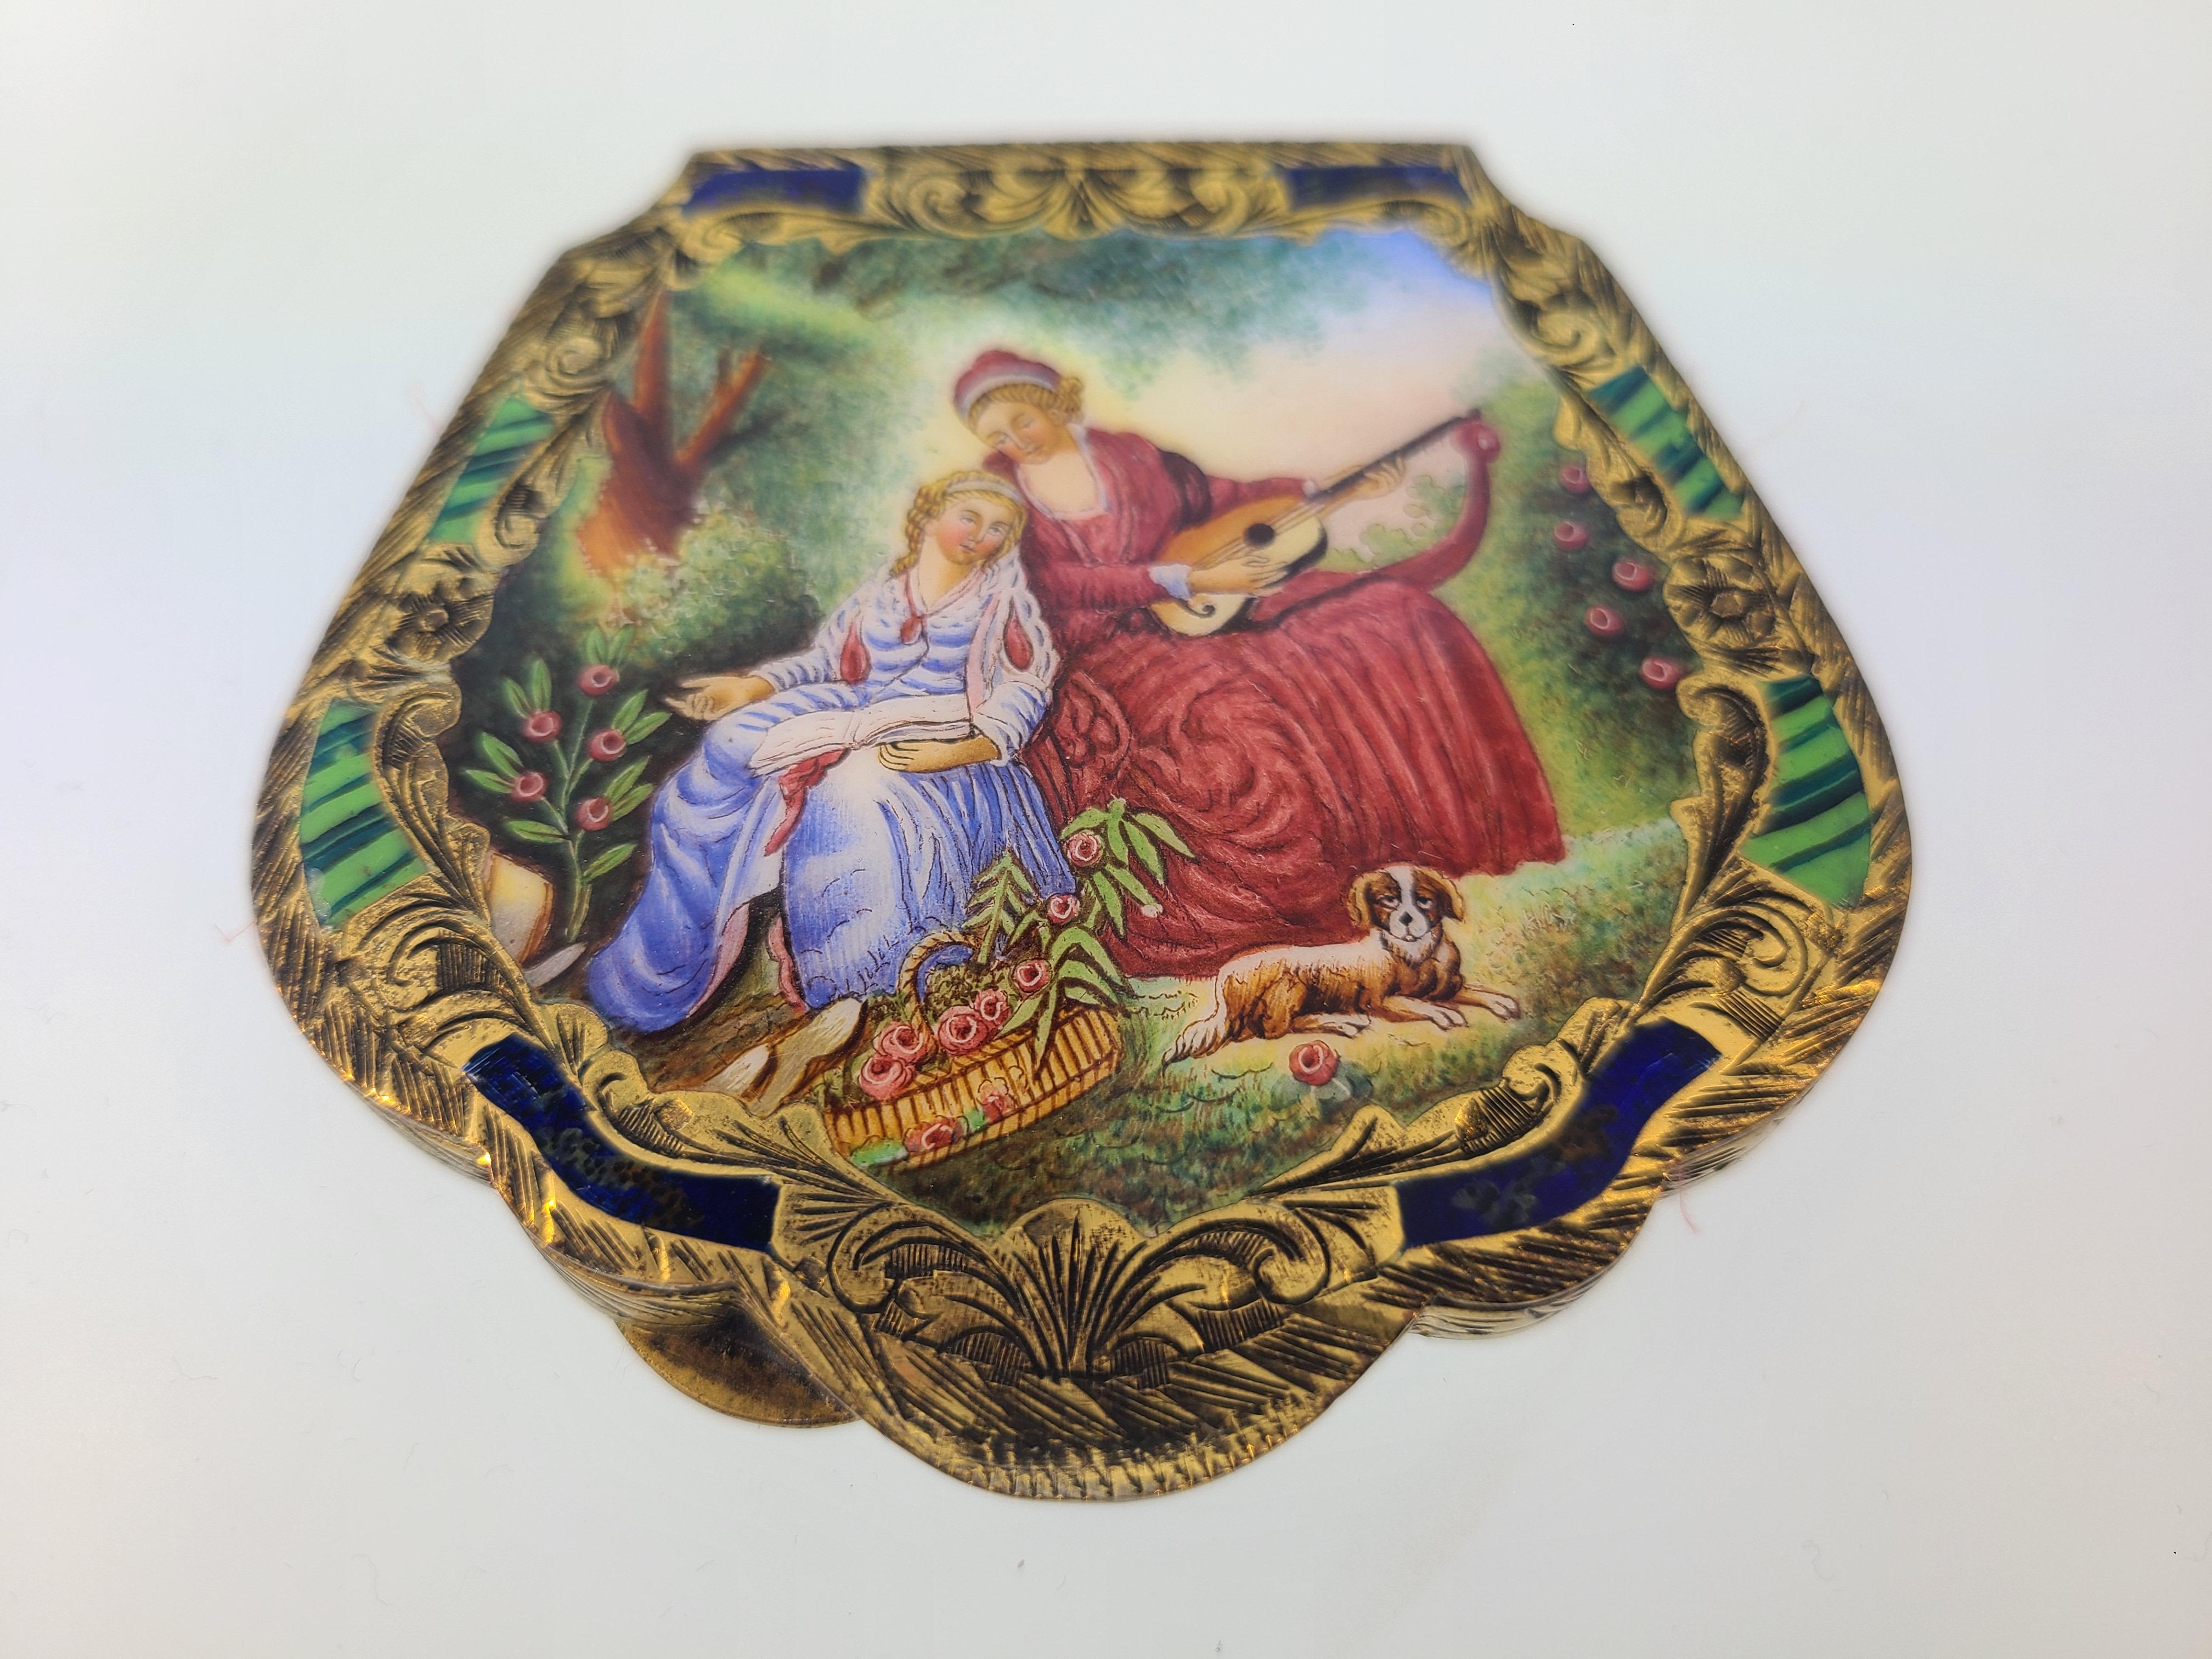 Italian 800 silver with gold vermeil and hand painted compact.

This compact features beautiful gold vermeil over 800 silver with an etched scroll design. Hand painted Italian garden scene on one side, with painted enamel detail. Beveled mirror with